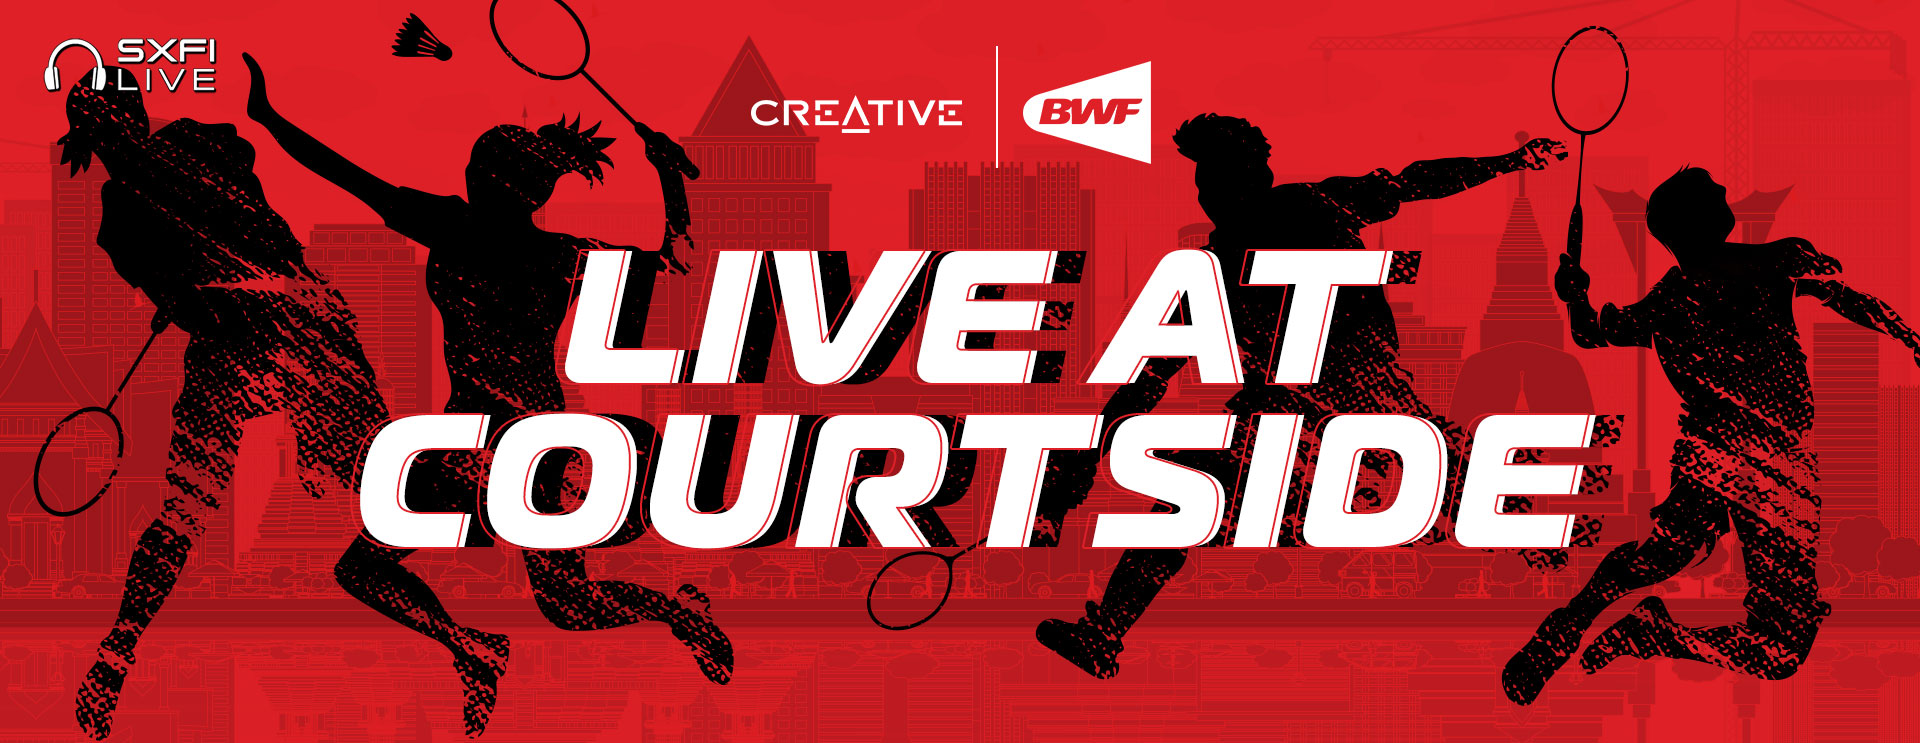 BWF Partners with Creative to Add Holography To Badminton Live Streams with SXFI LIVE.